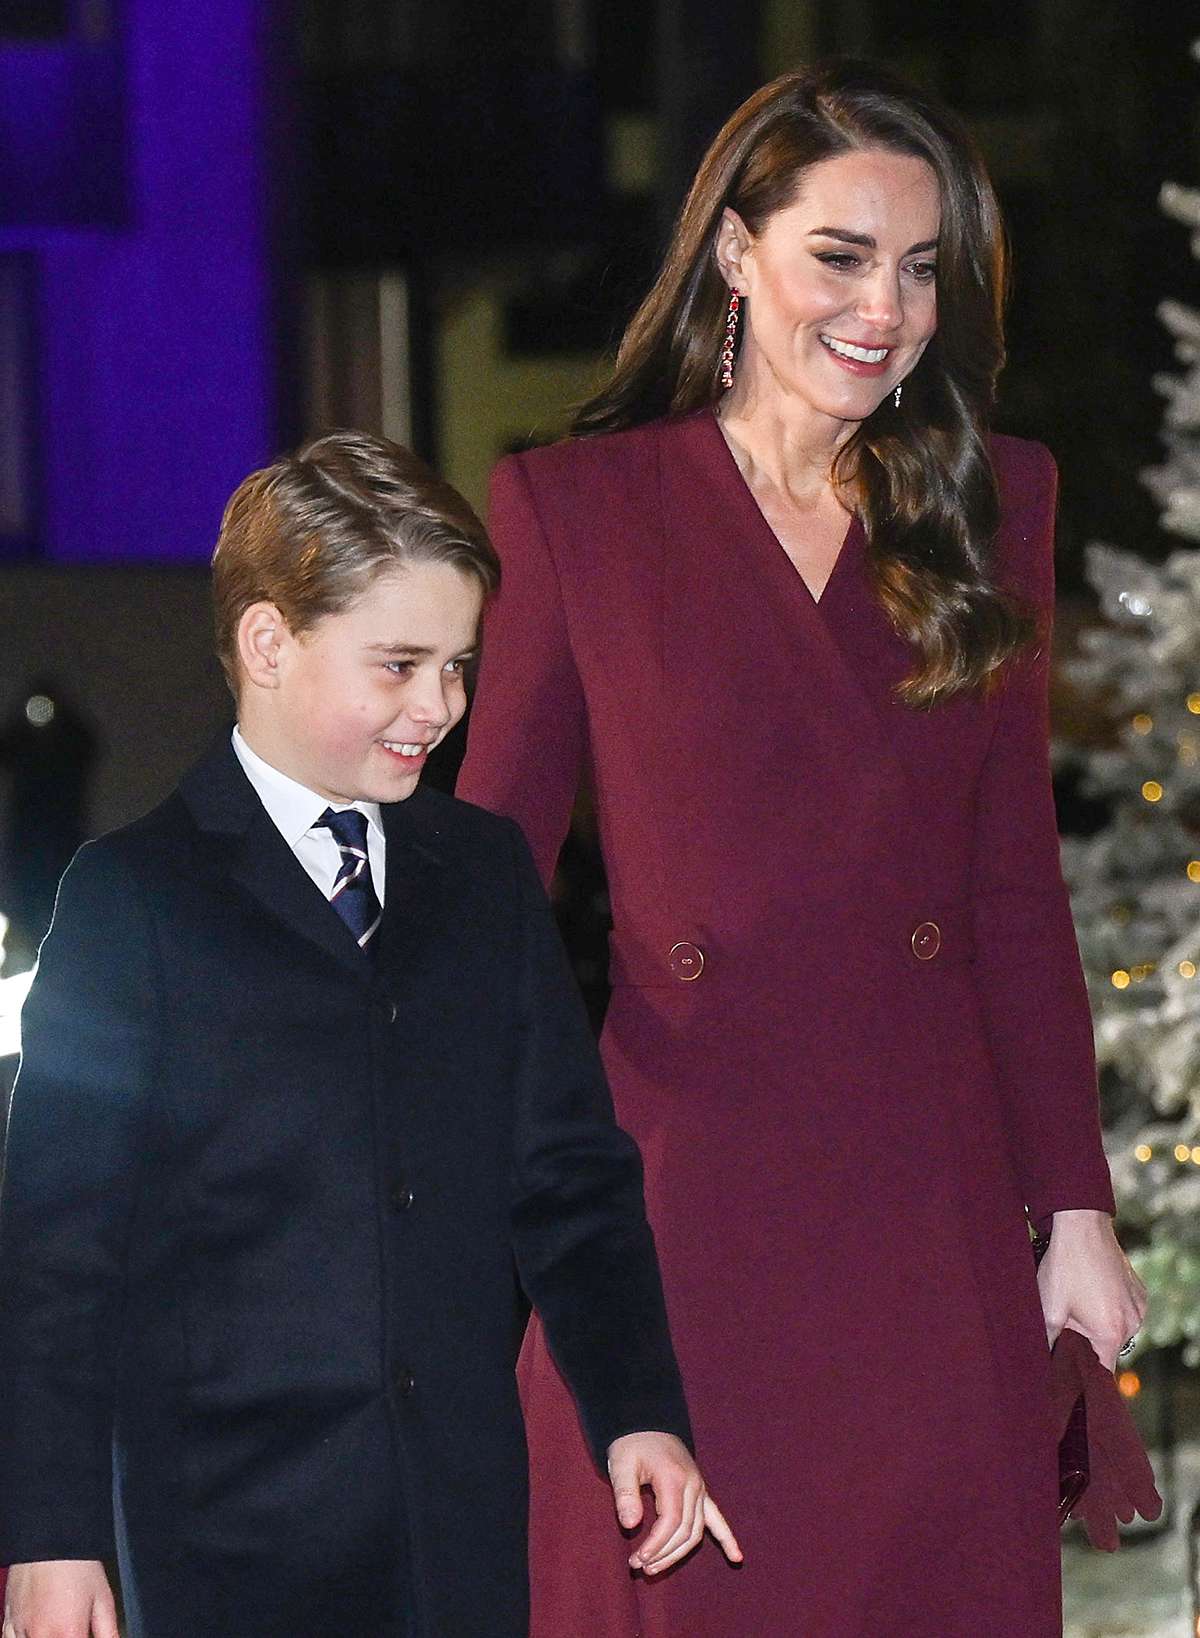 Prince George of Wales and Catherine, Princess of Wales attend the 'Together at Christmas' Carol Service at Westminster Abbey on December 15, 2022 in London, England.